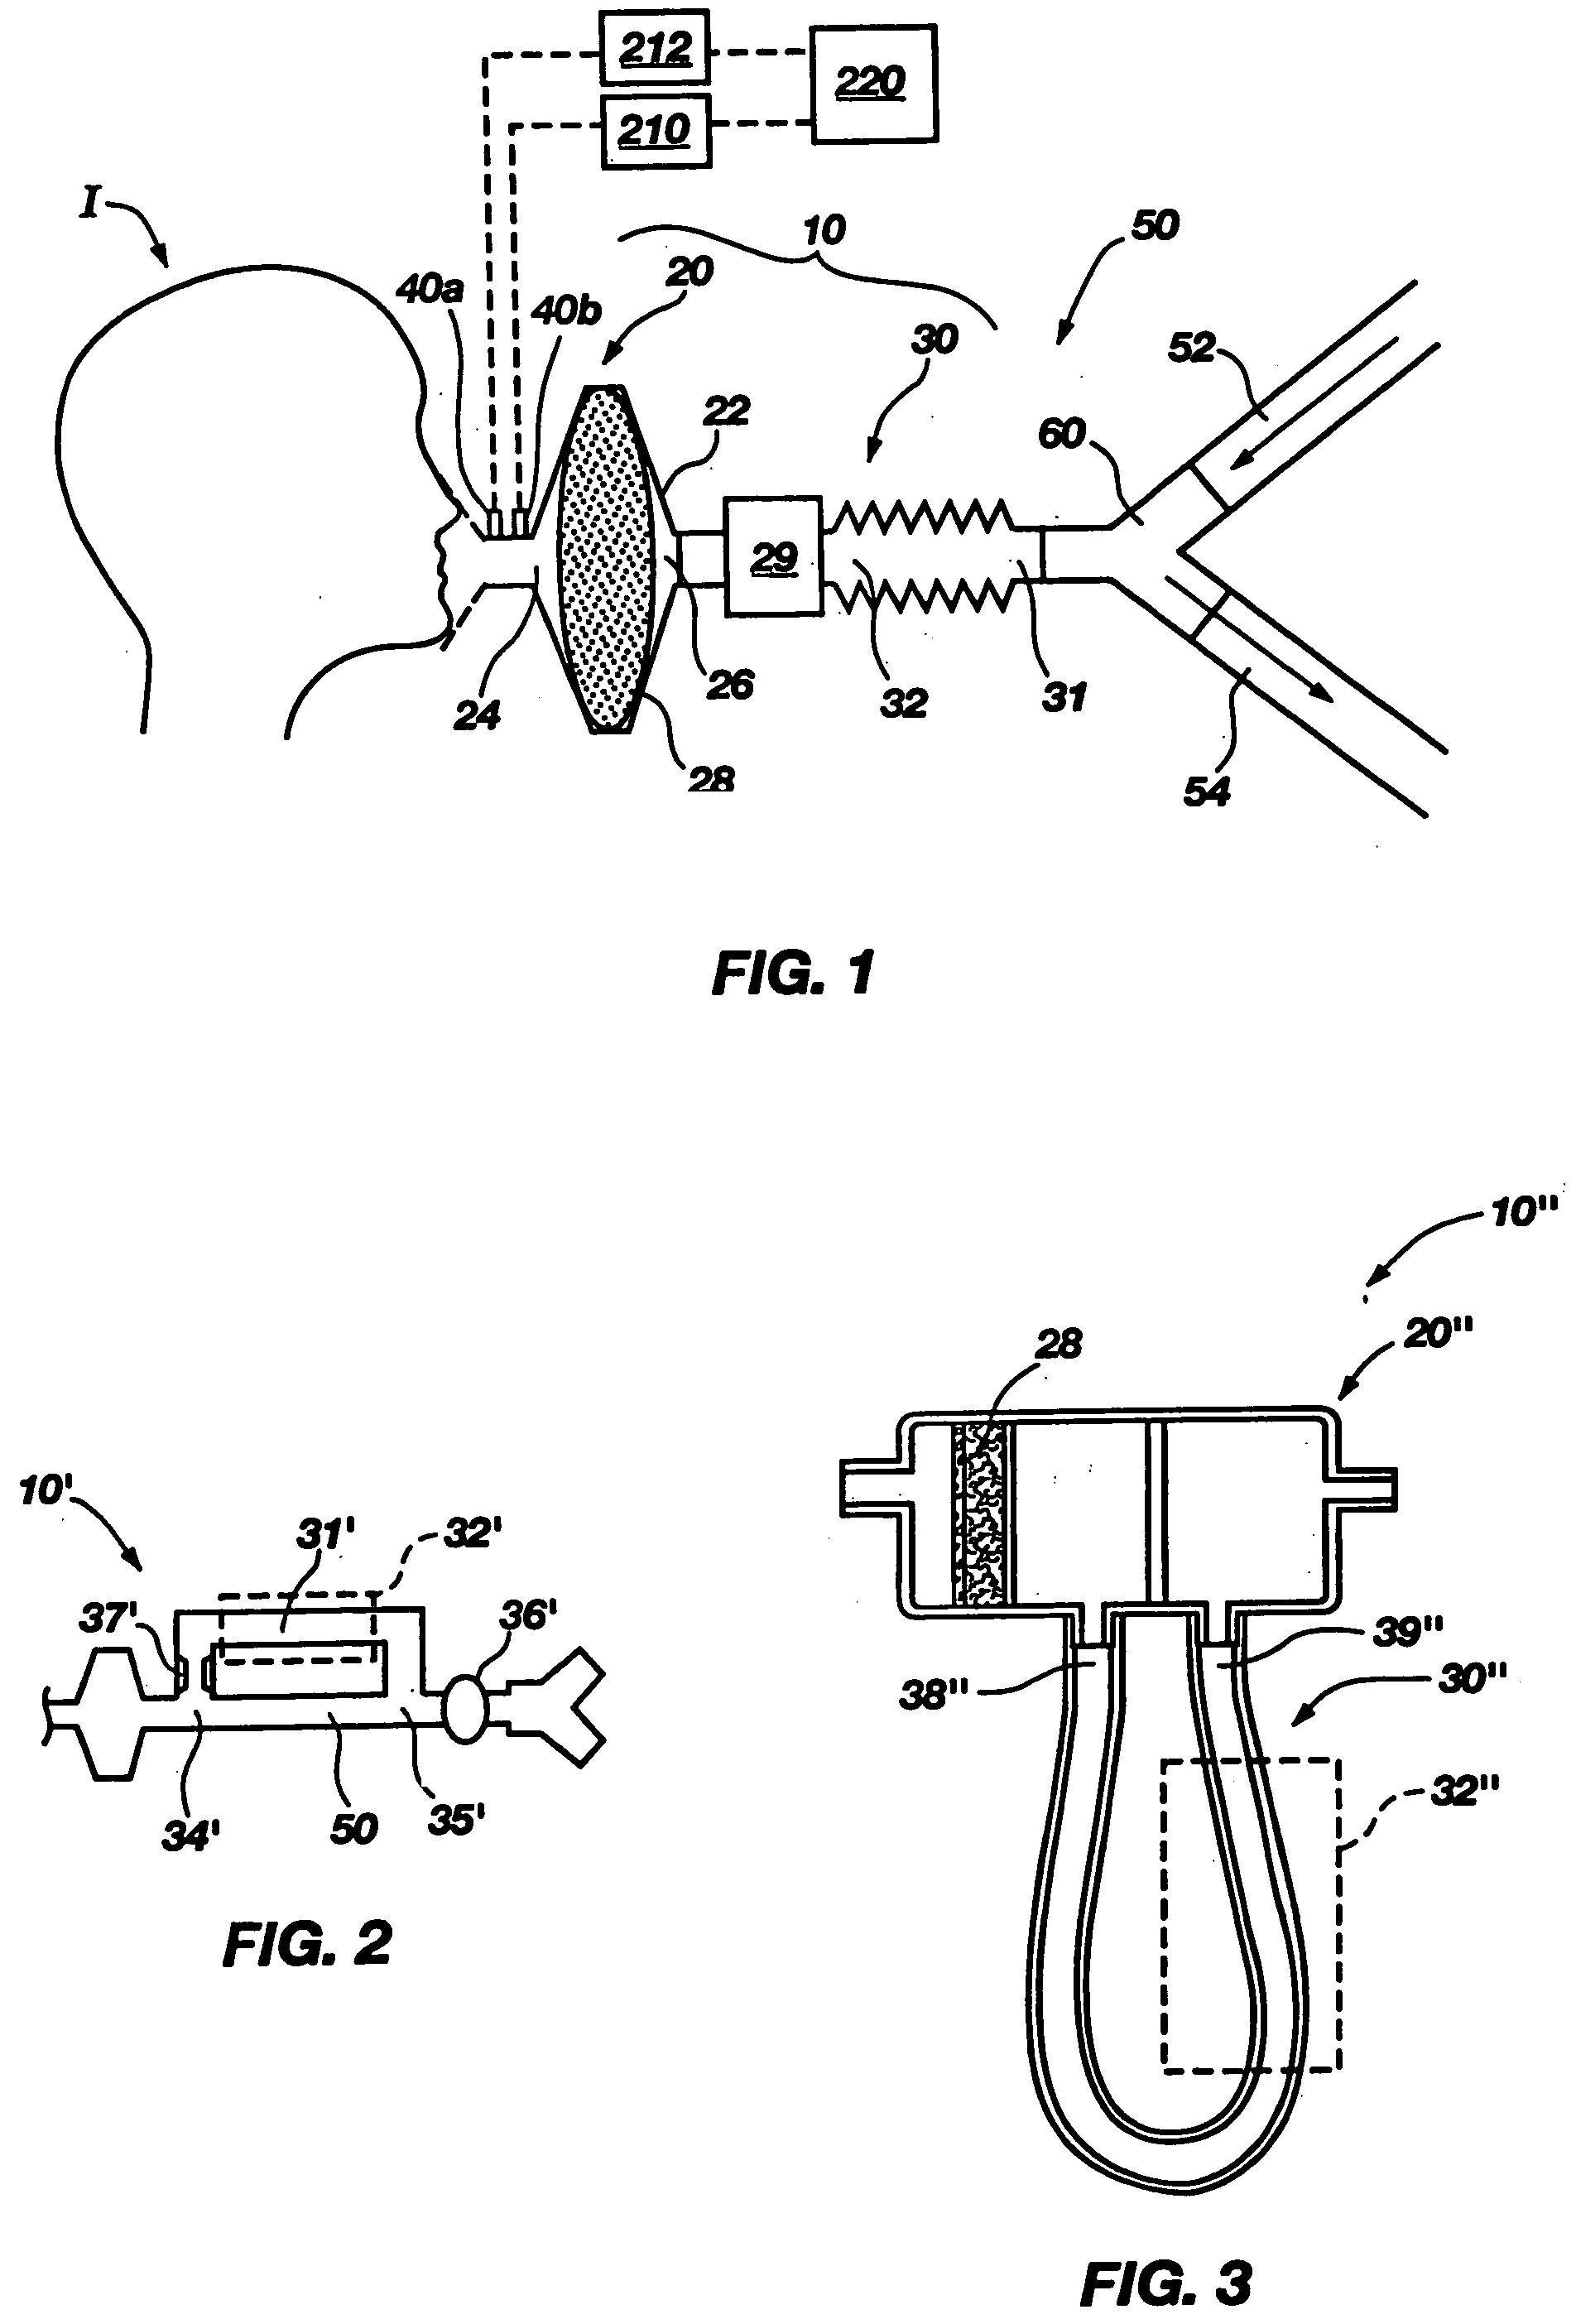 Apparatus and techniques for reducing the effects of general anesthetics